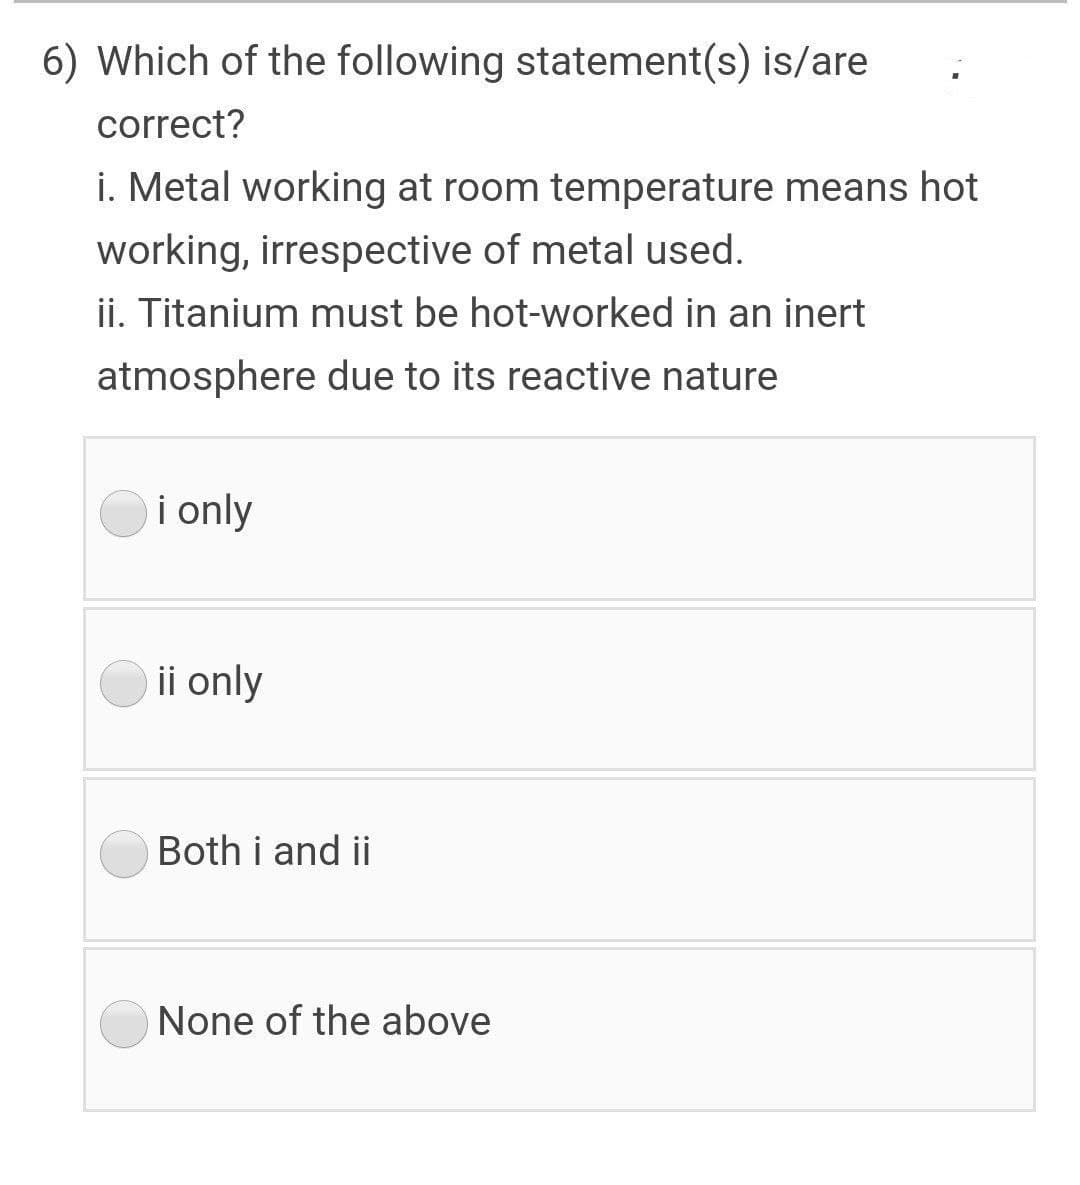 6) Which of the following statement(s) is/are
correct?
i. Metal working at room temperature means hot
working, irrespective of metal used.
ii. Titanium must be hot-worked in an inert
atmosphere due to its reactive nature
i only
ii only
Both i and ii
None of the above
